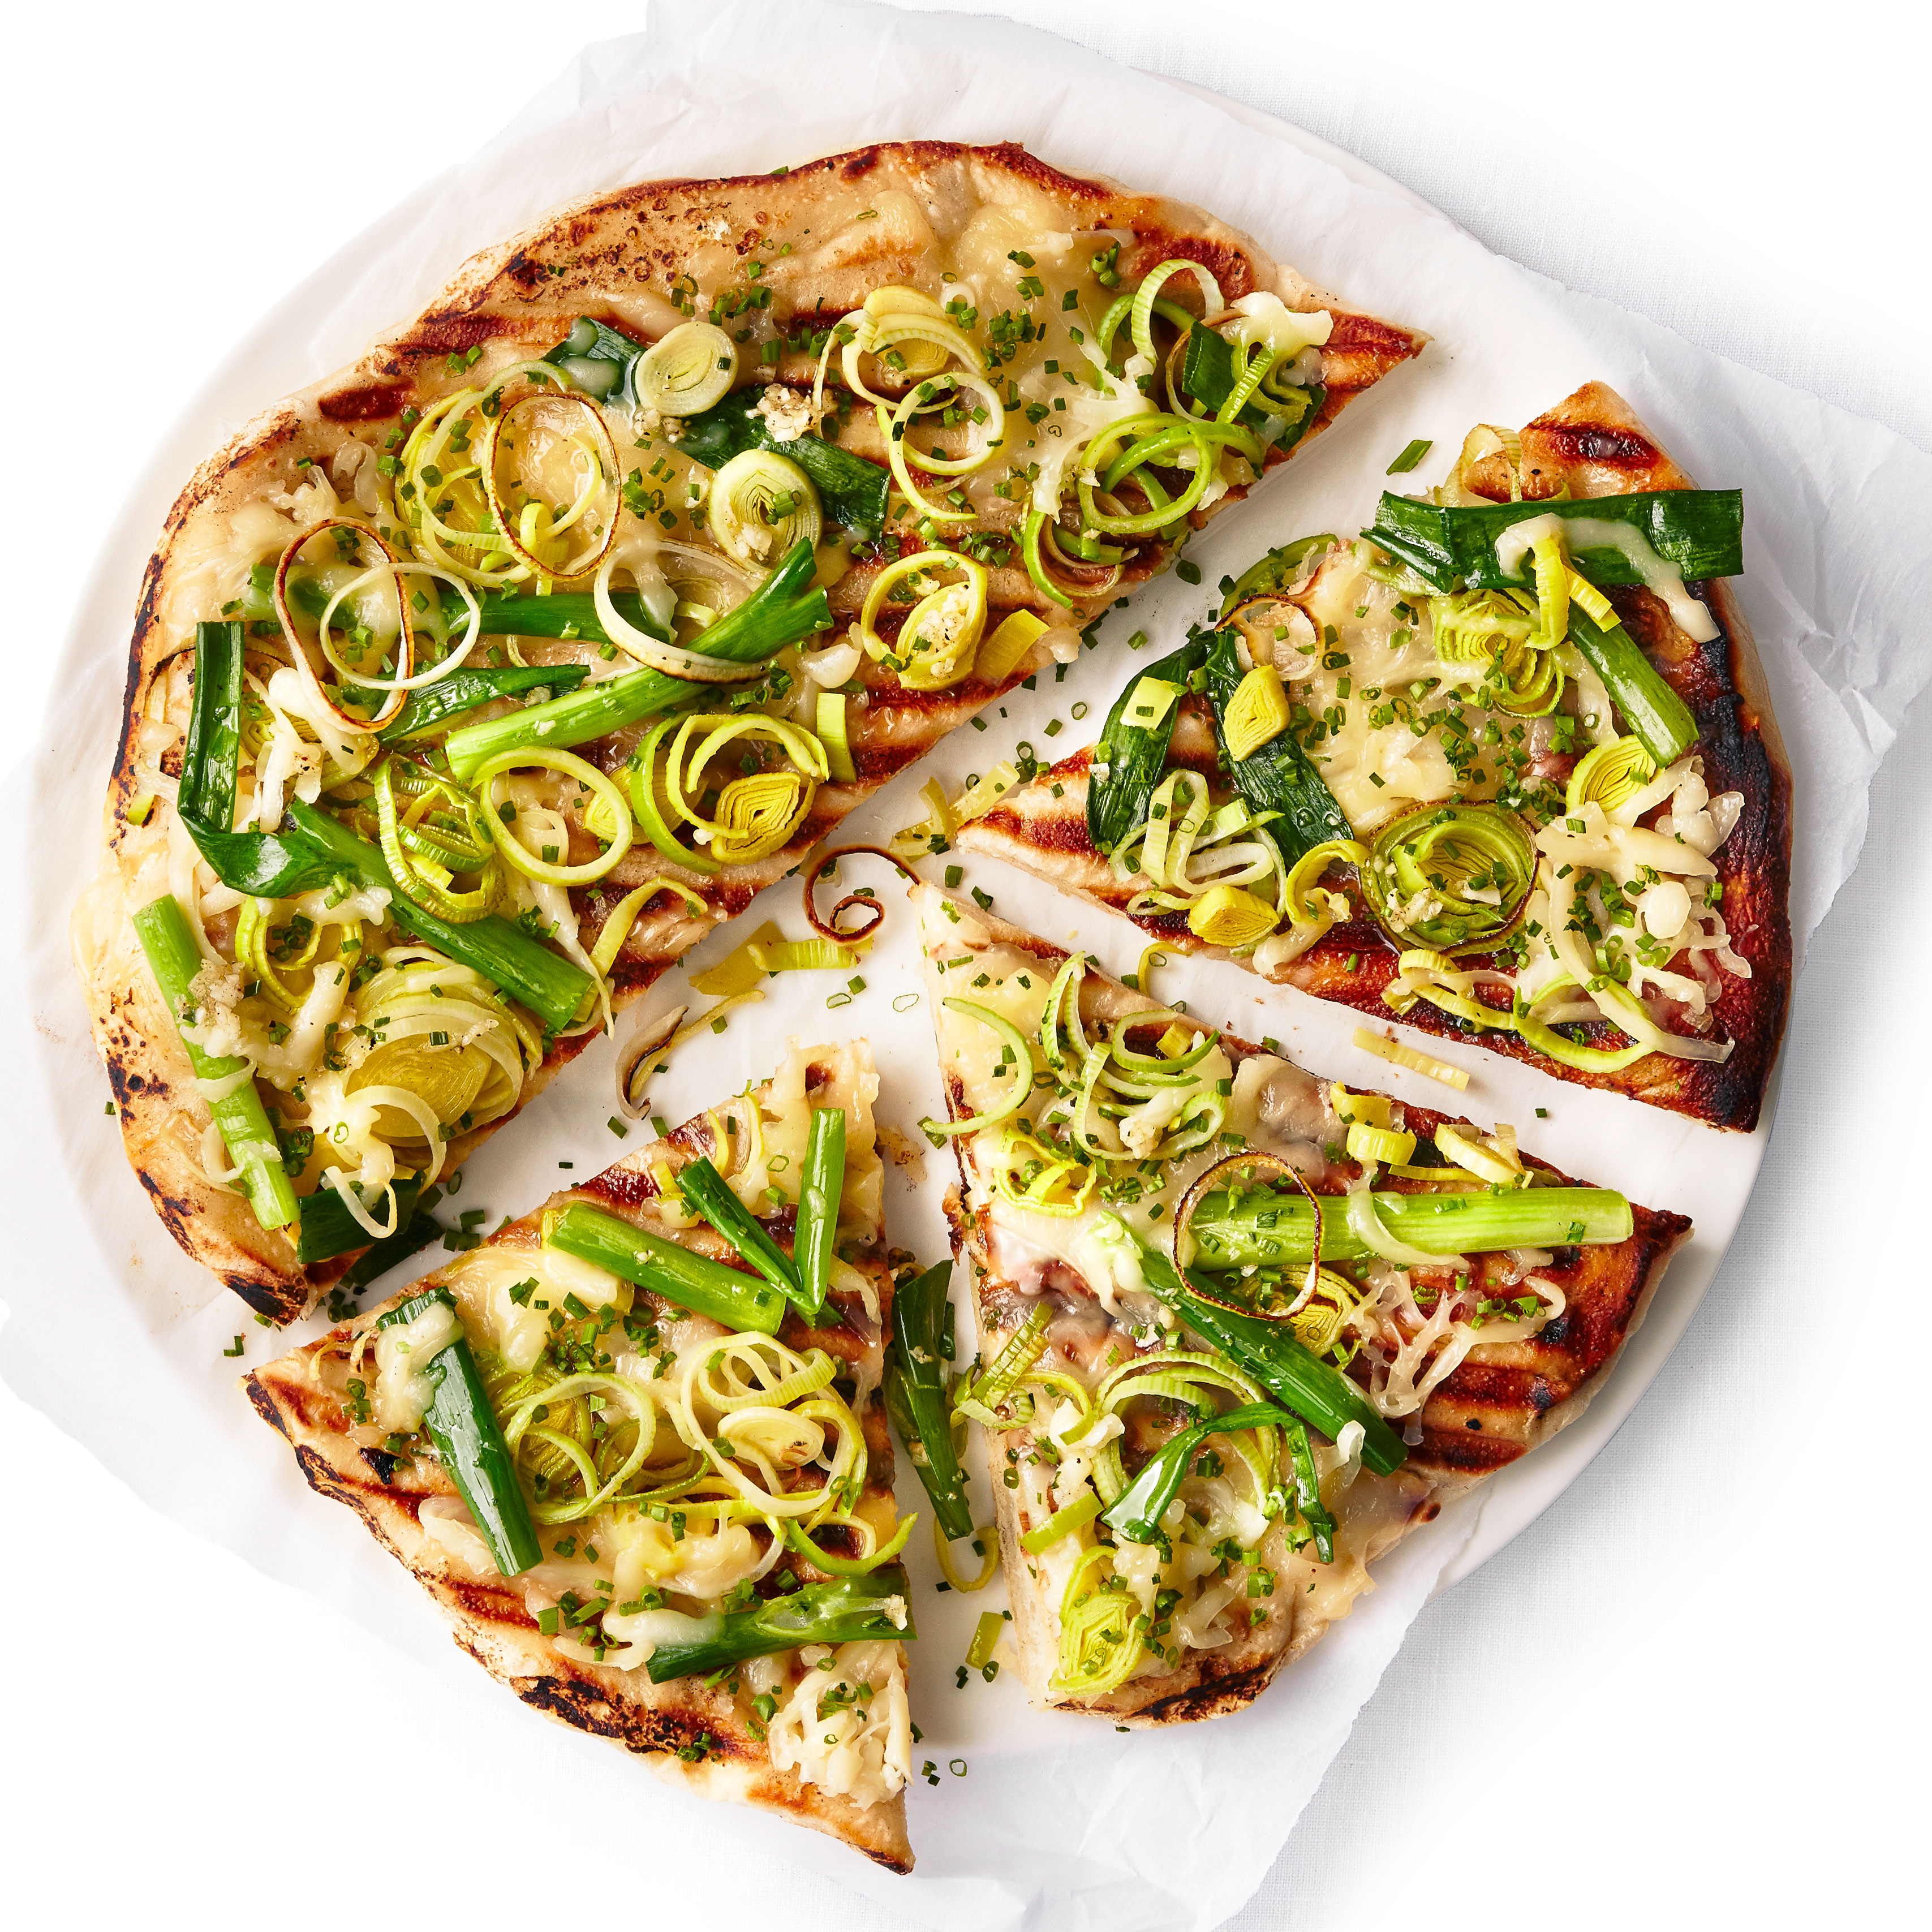 su-Grilled Four Onion Pizza Image